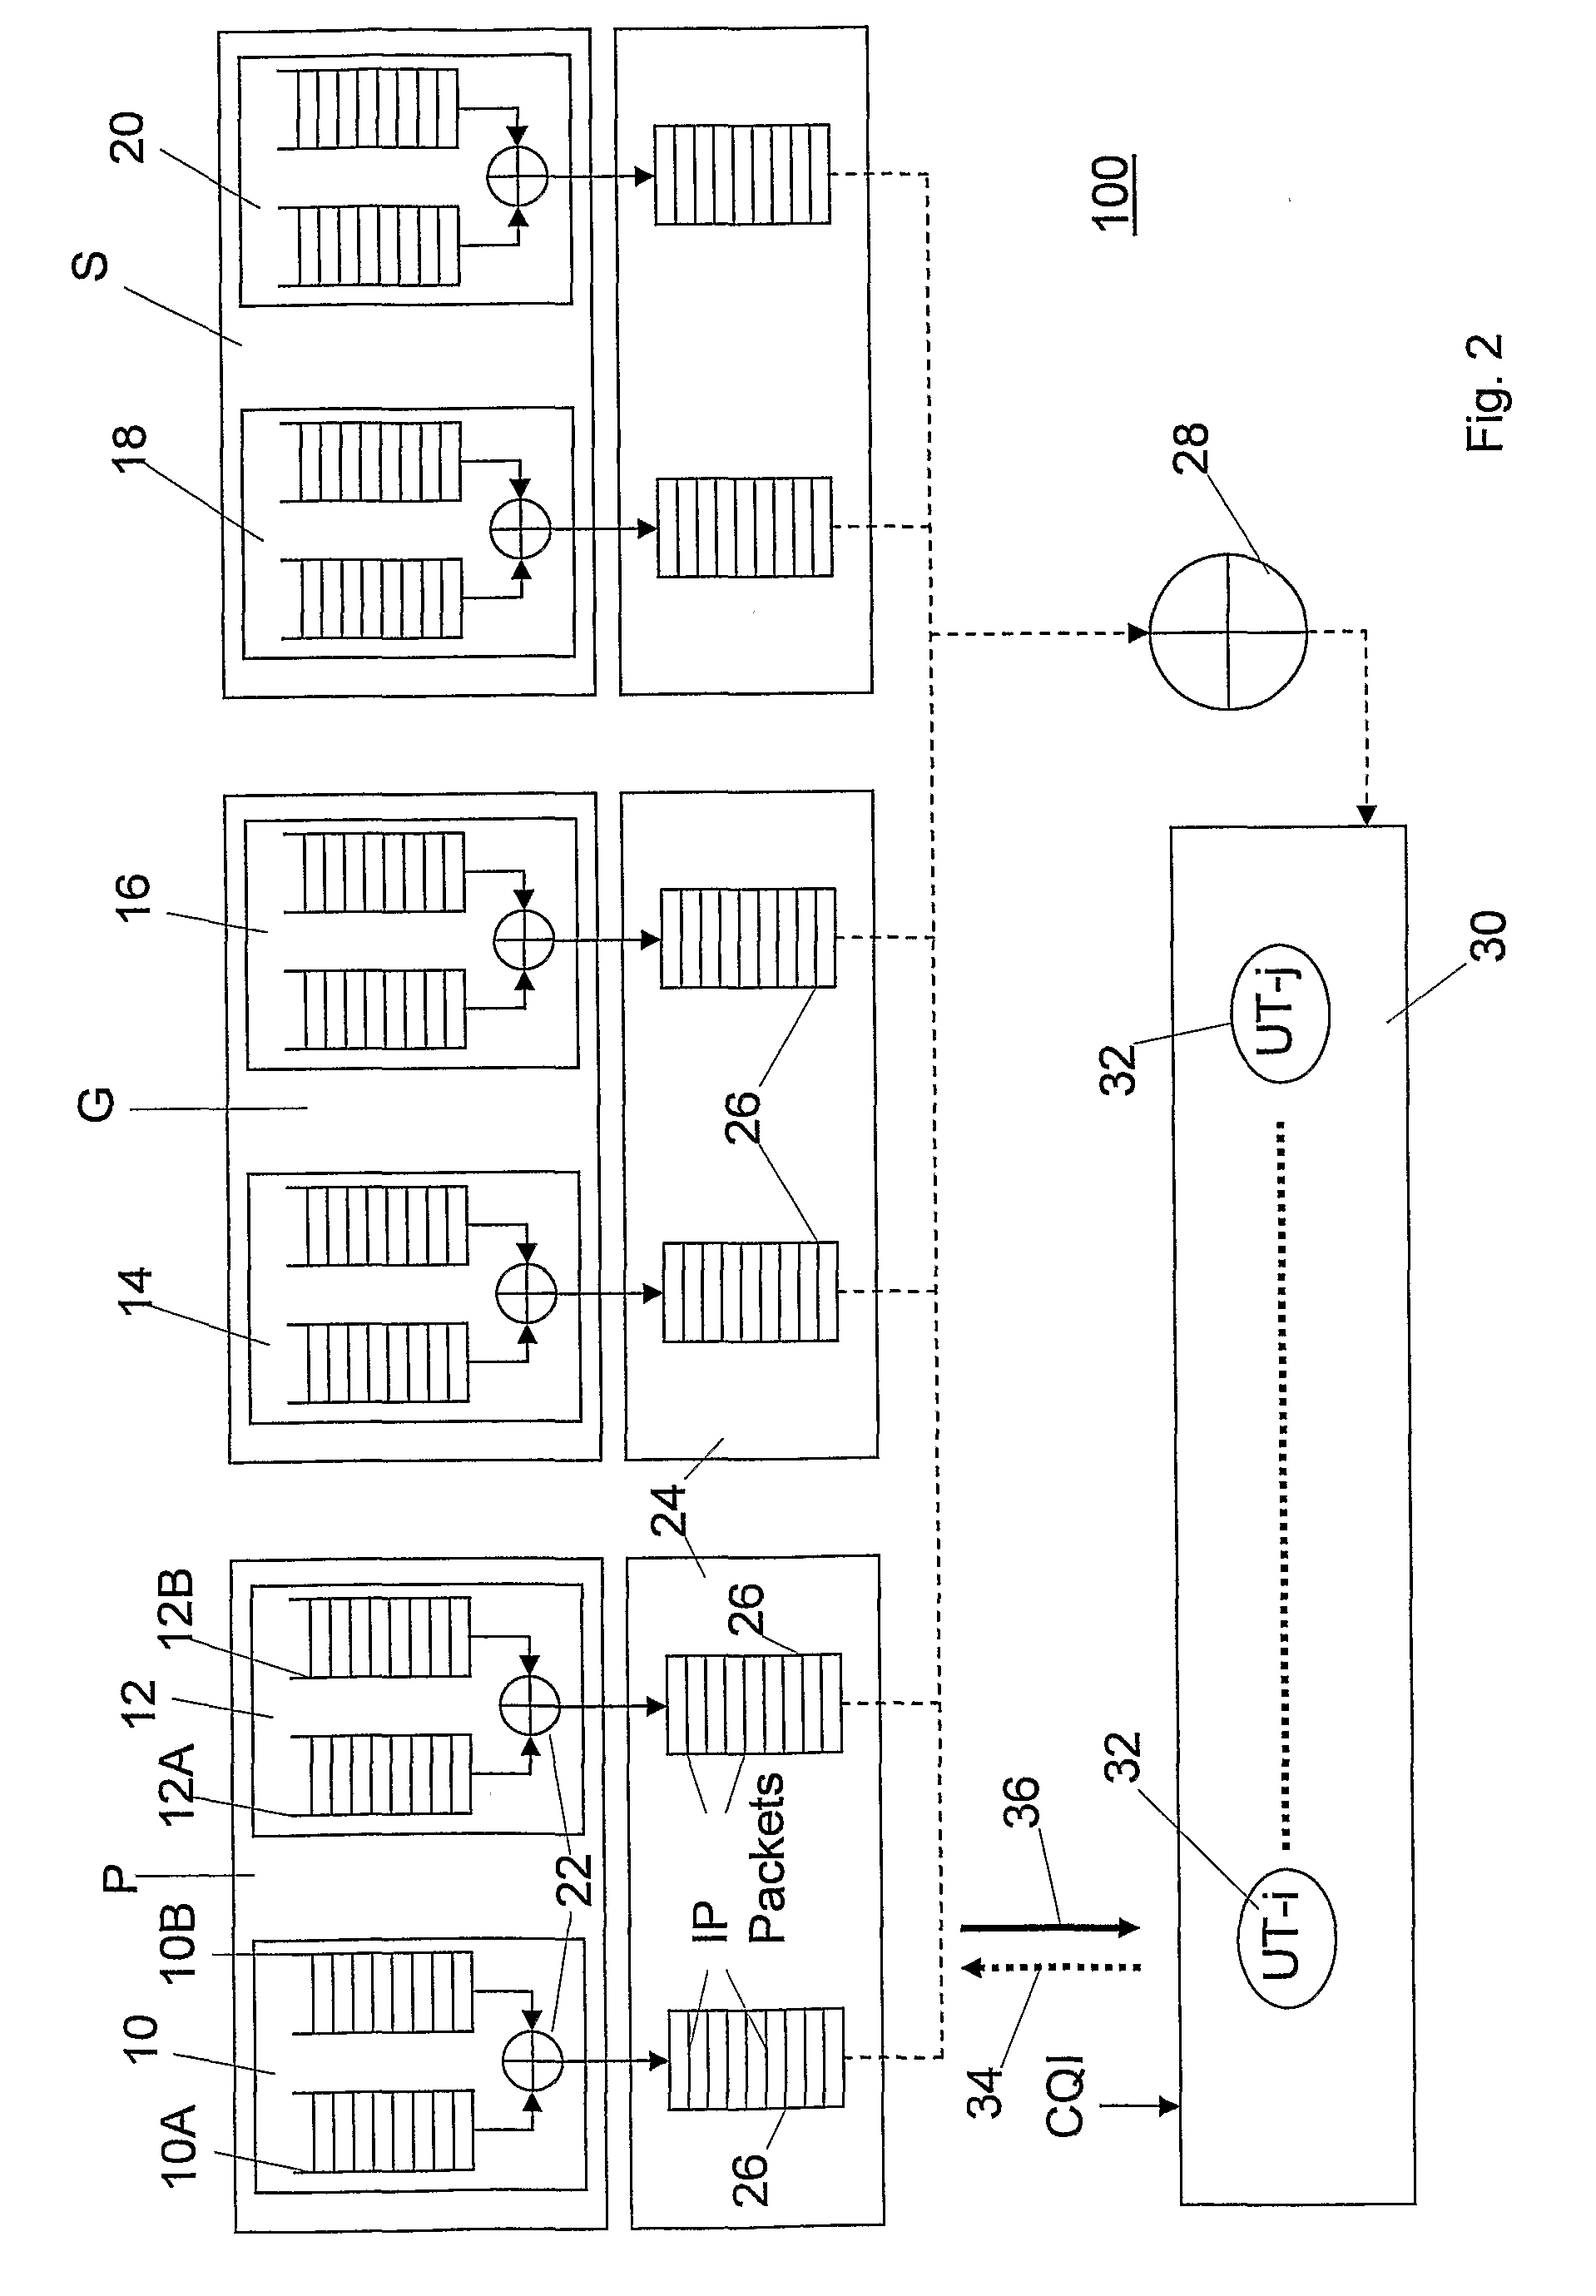 Method and Apparatus for Solving Data Packet Traffic Congestion